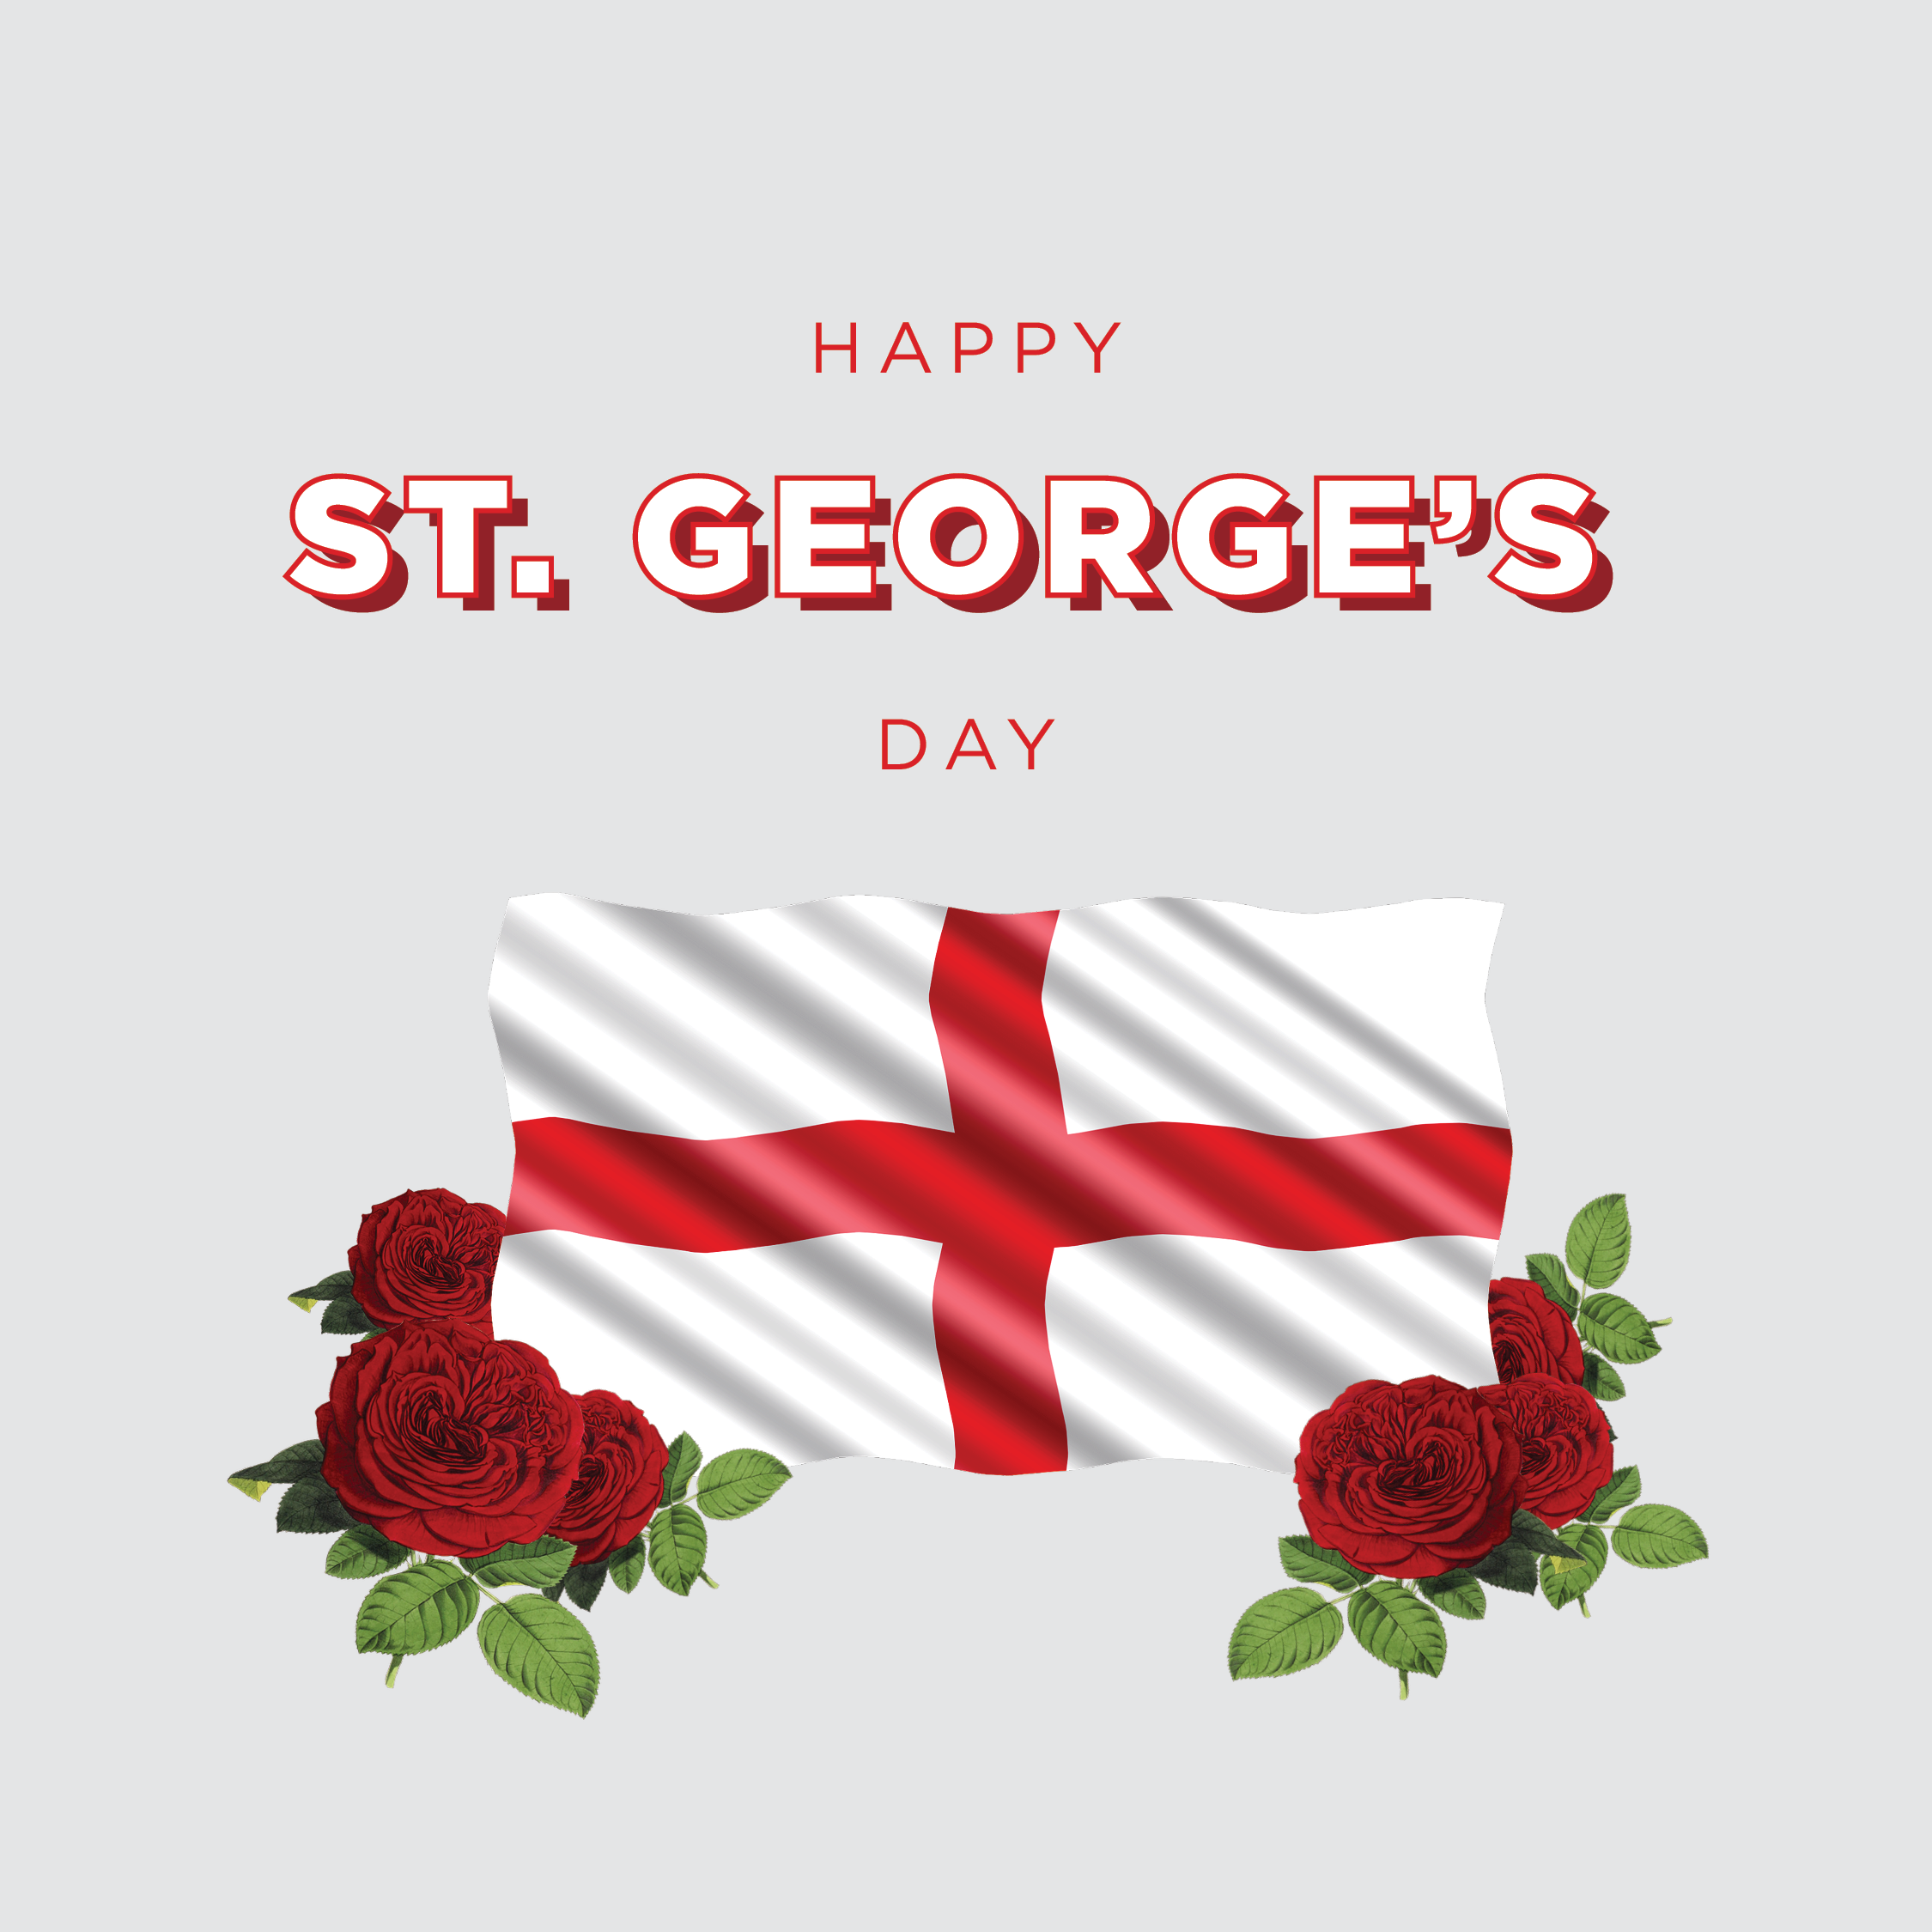 St George’s Day 2022